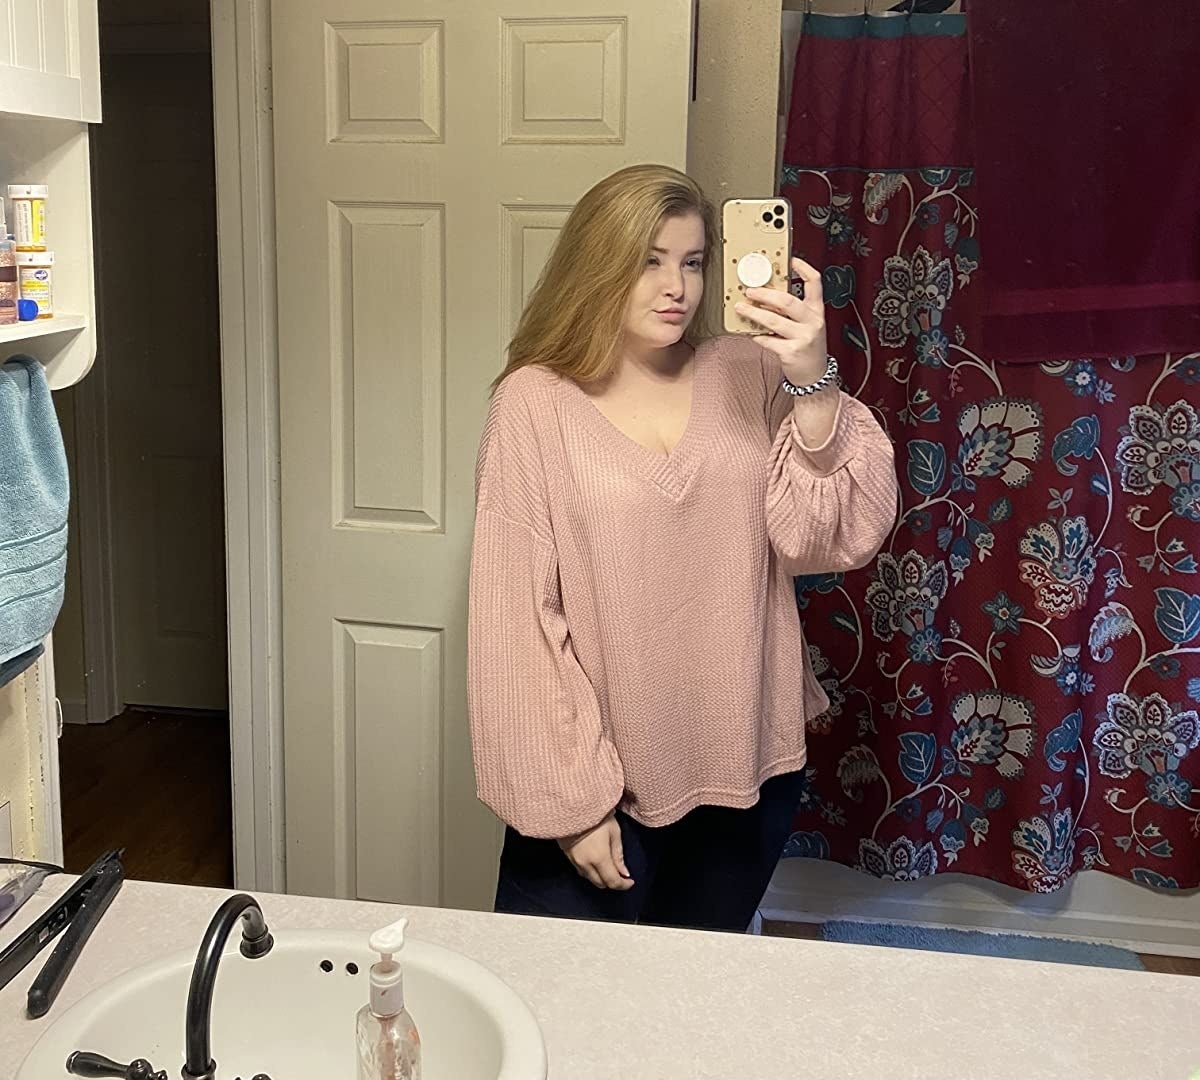 The top in pink worn by an Amazon reviewer taking a bathroom selfie